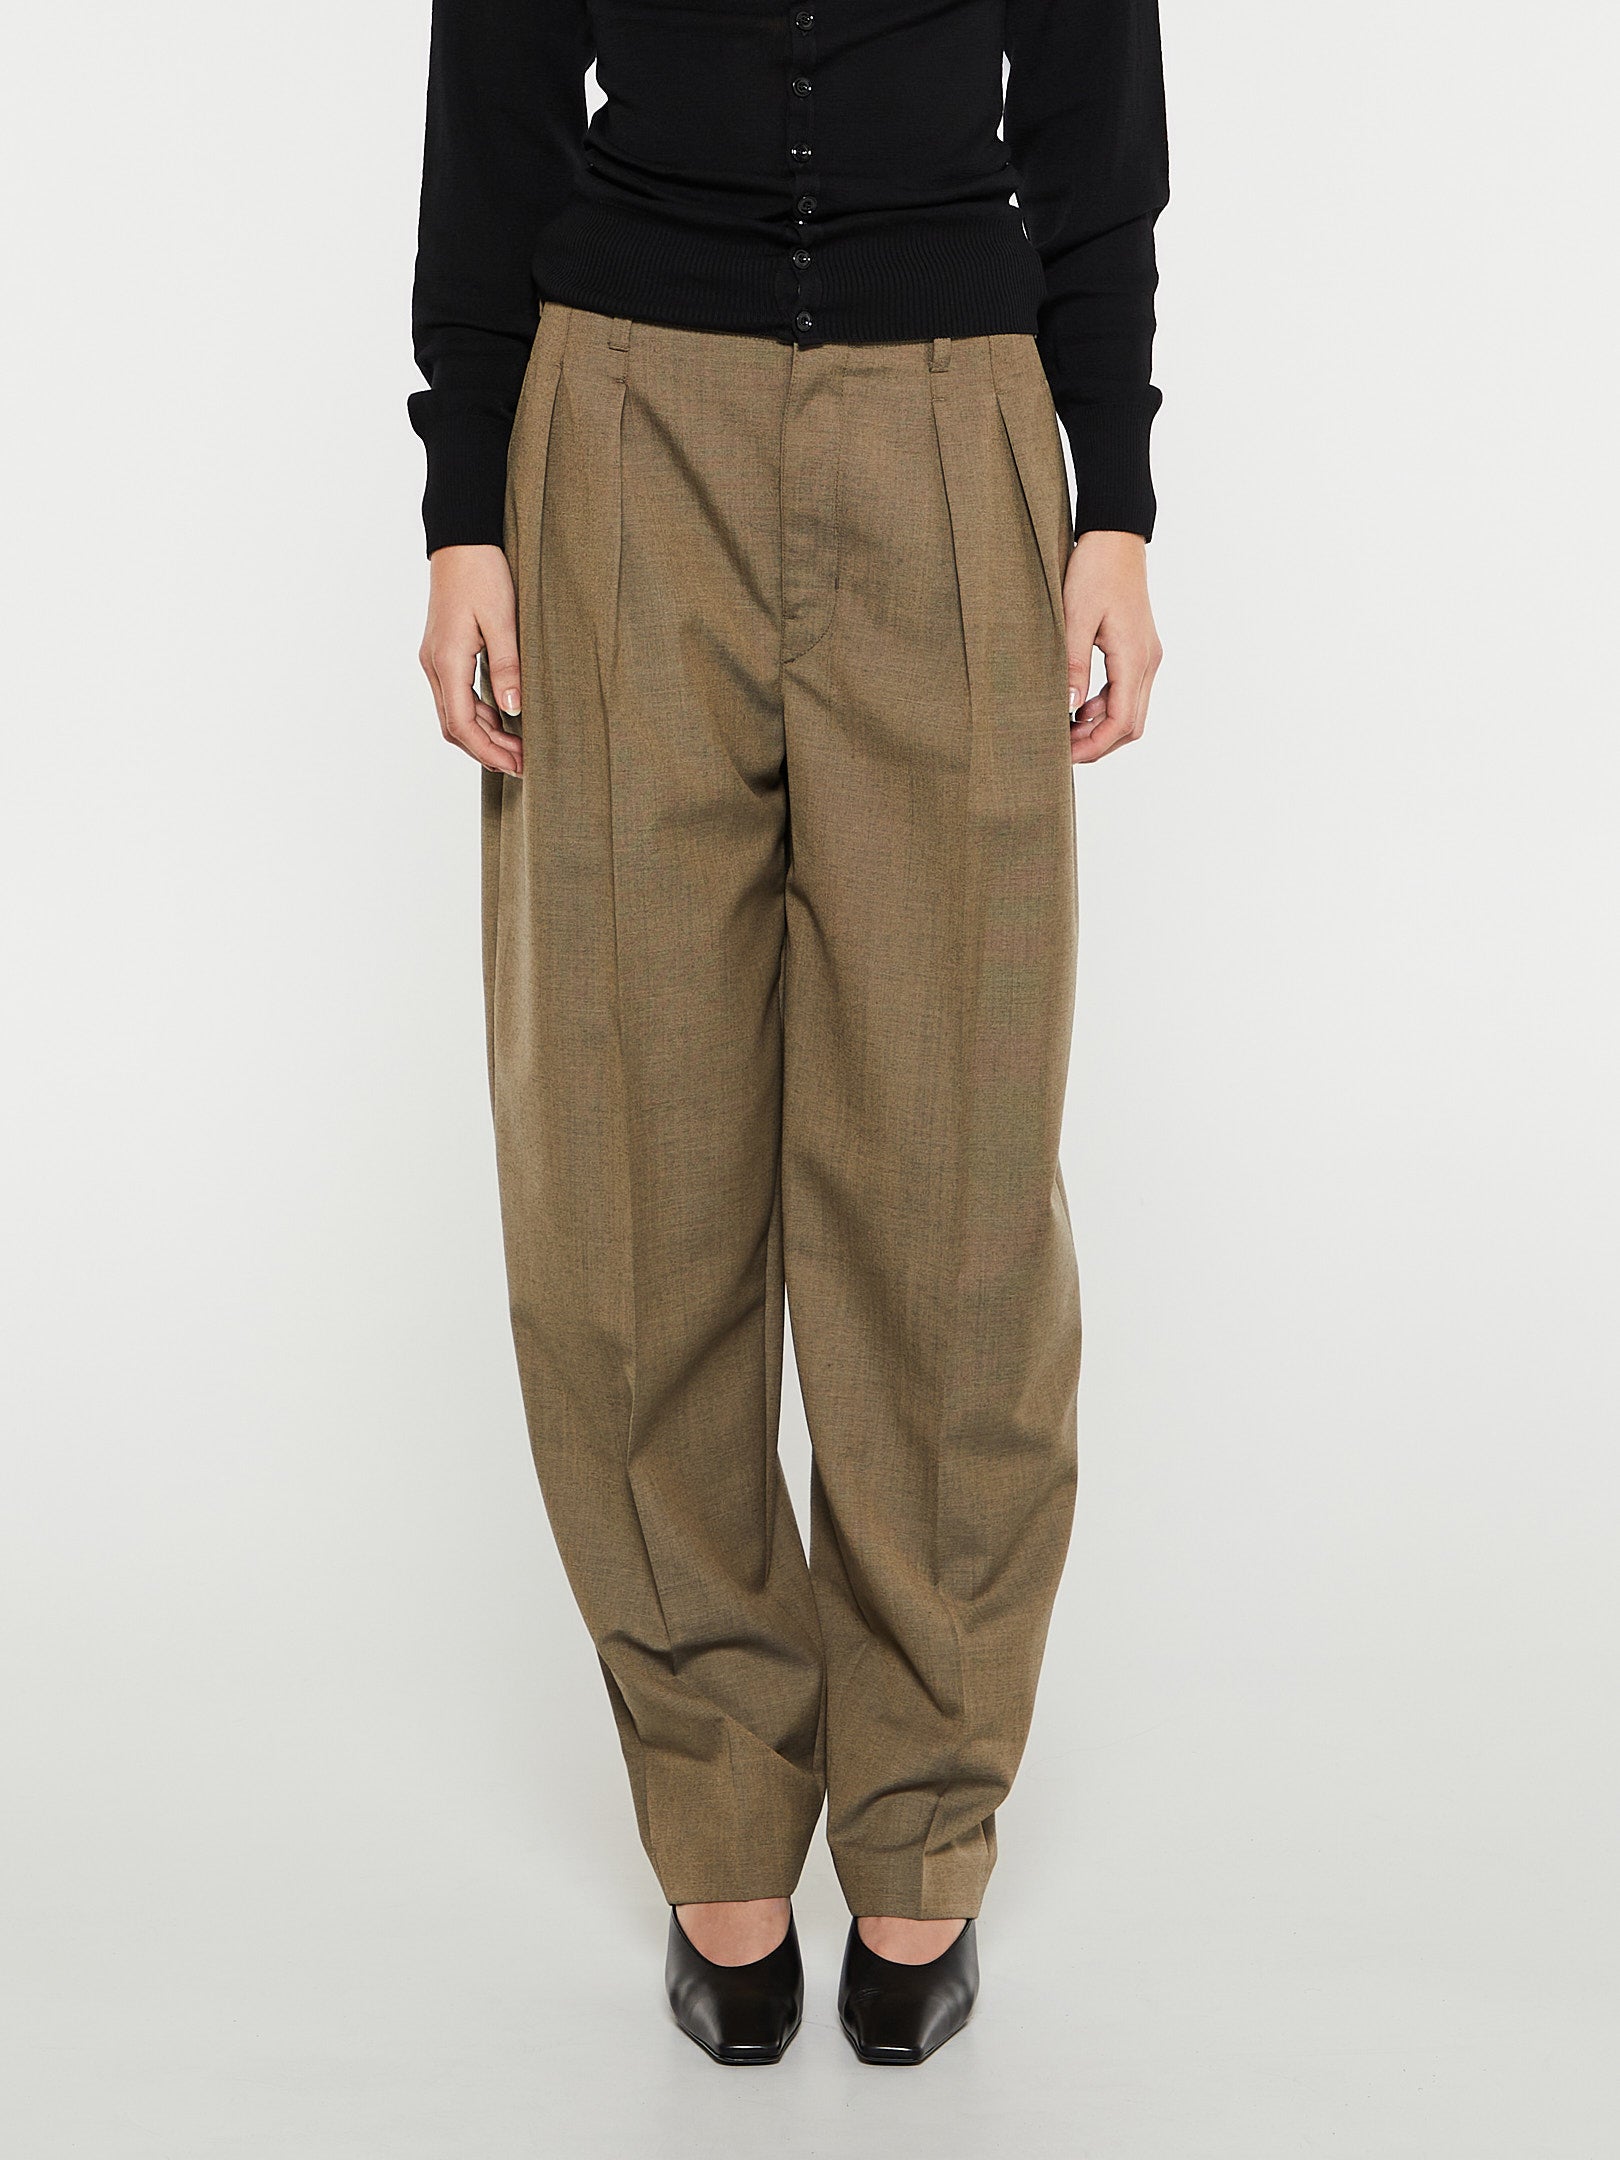 Pleated Tapered Pants in Beige Grey